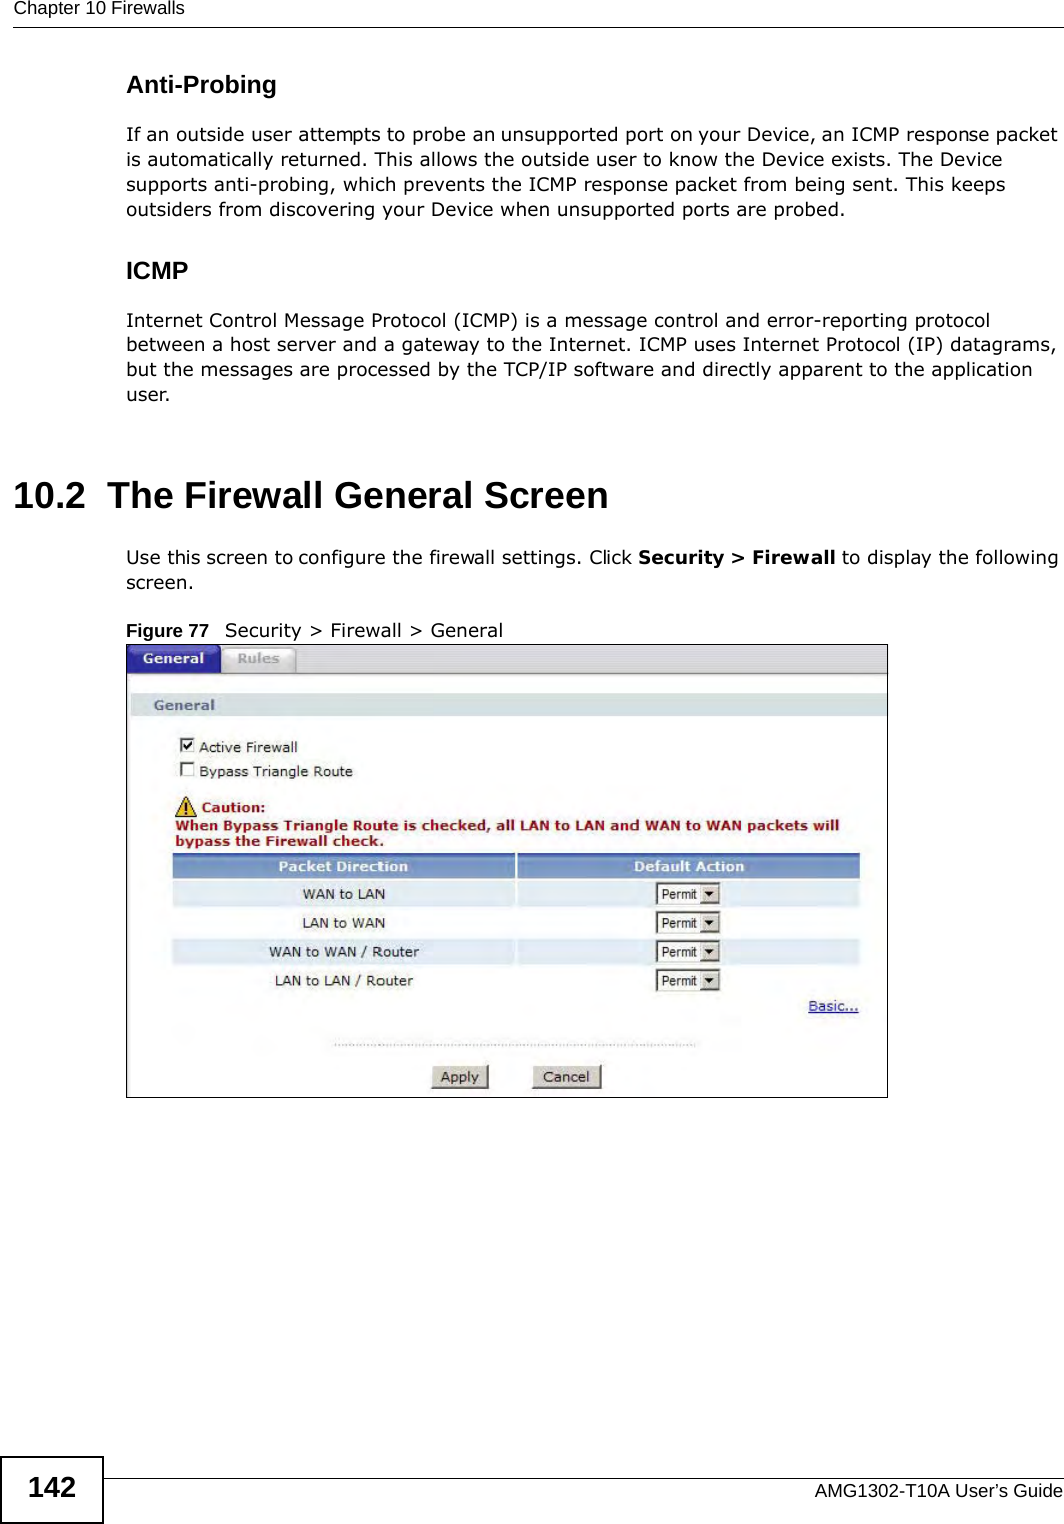 Chapter 10 FirewallsAMG1302-T10A User’s Guide142Anti-ProbingIf an outside user attempts to probe an unsupported port on your Device, an ICMP response packet is automatically returned. This allows the outside user to know the Device exists. The Device supports anti-probing, which prevents the ICMP response packet from being sent. This keeps outsiders from discovering your Device when unsupported ports are probed. ICMPInternet Control Message Protocol (ICMP) is a message control and error-reporting protocol between a host server and a gateway to the Internet. ICMP uses Internet Protocol (IP) datagrams, but the messages are processed by the TCP/IP software and directly apparent to the application user. 10.2  The Firewall General ScreenUse this screen to configure the firewall settings. Click Security &gt; Firewall to display the following screen.Figure 77   Security &gt; Firewall &gt; General